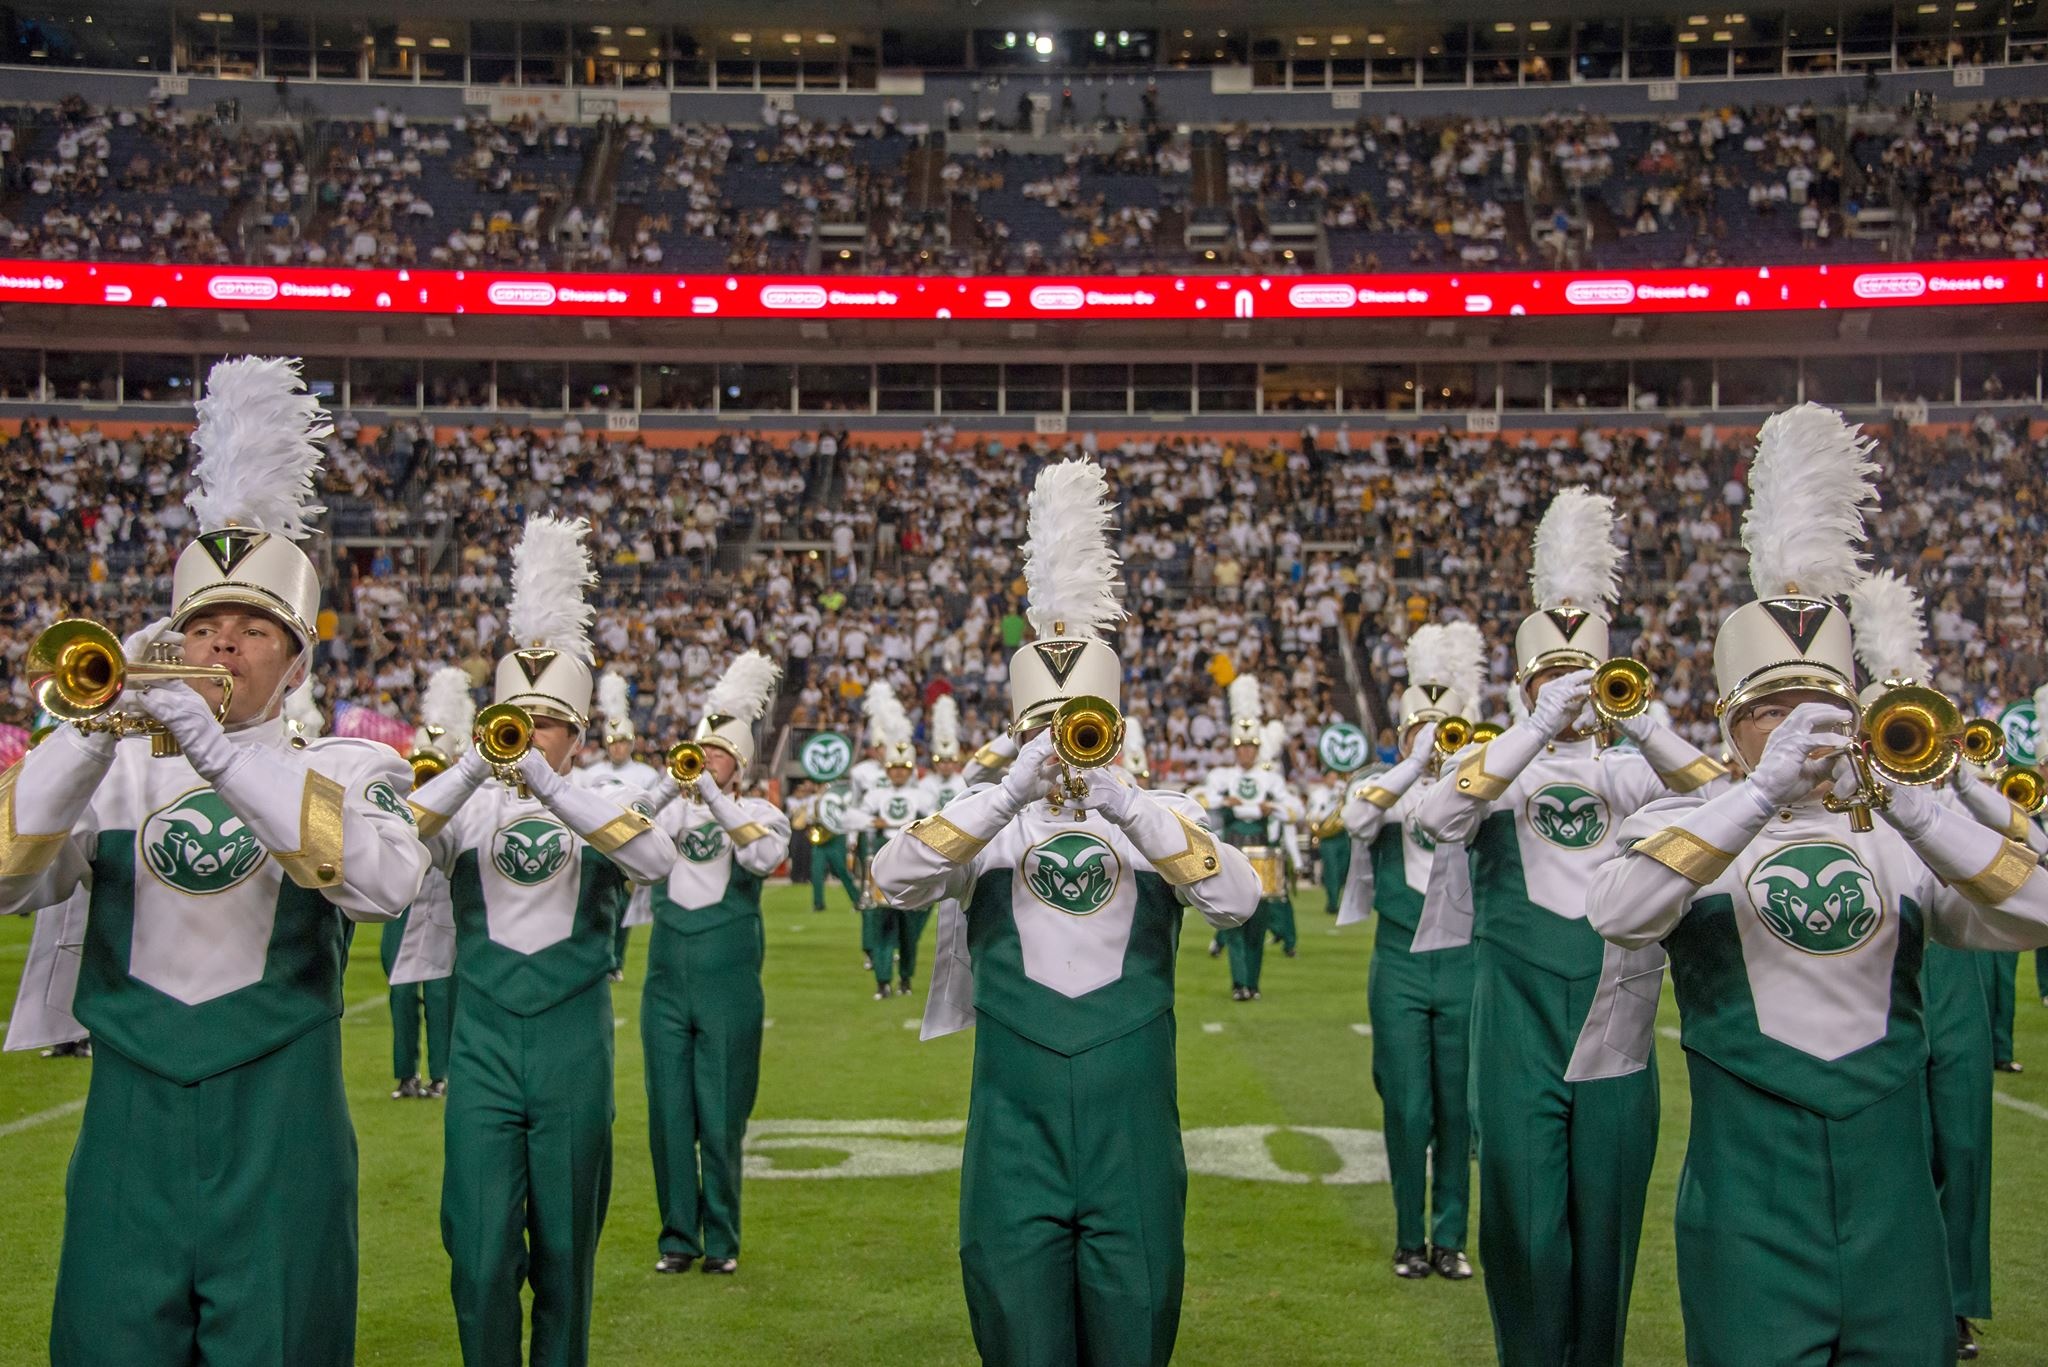 Marching Band: Colorado State University, A group of instrumental musicians who perform while walking, Musical instruments,  Trumpets section. 2050x1370 HD Wallpaper.